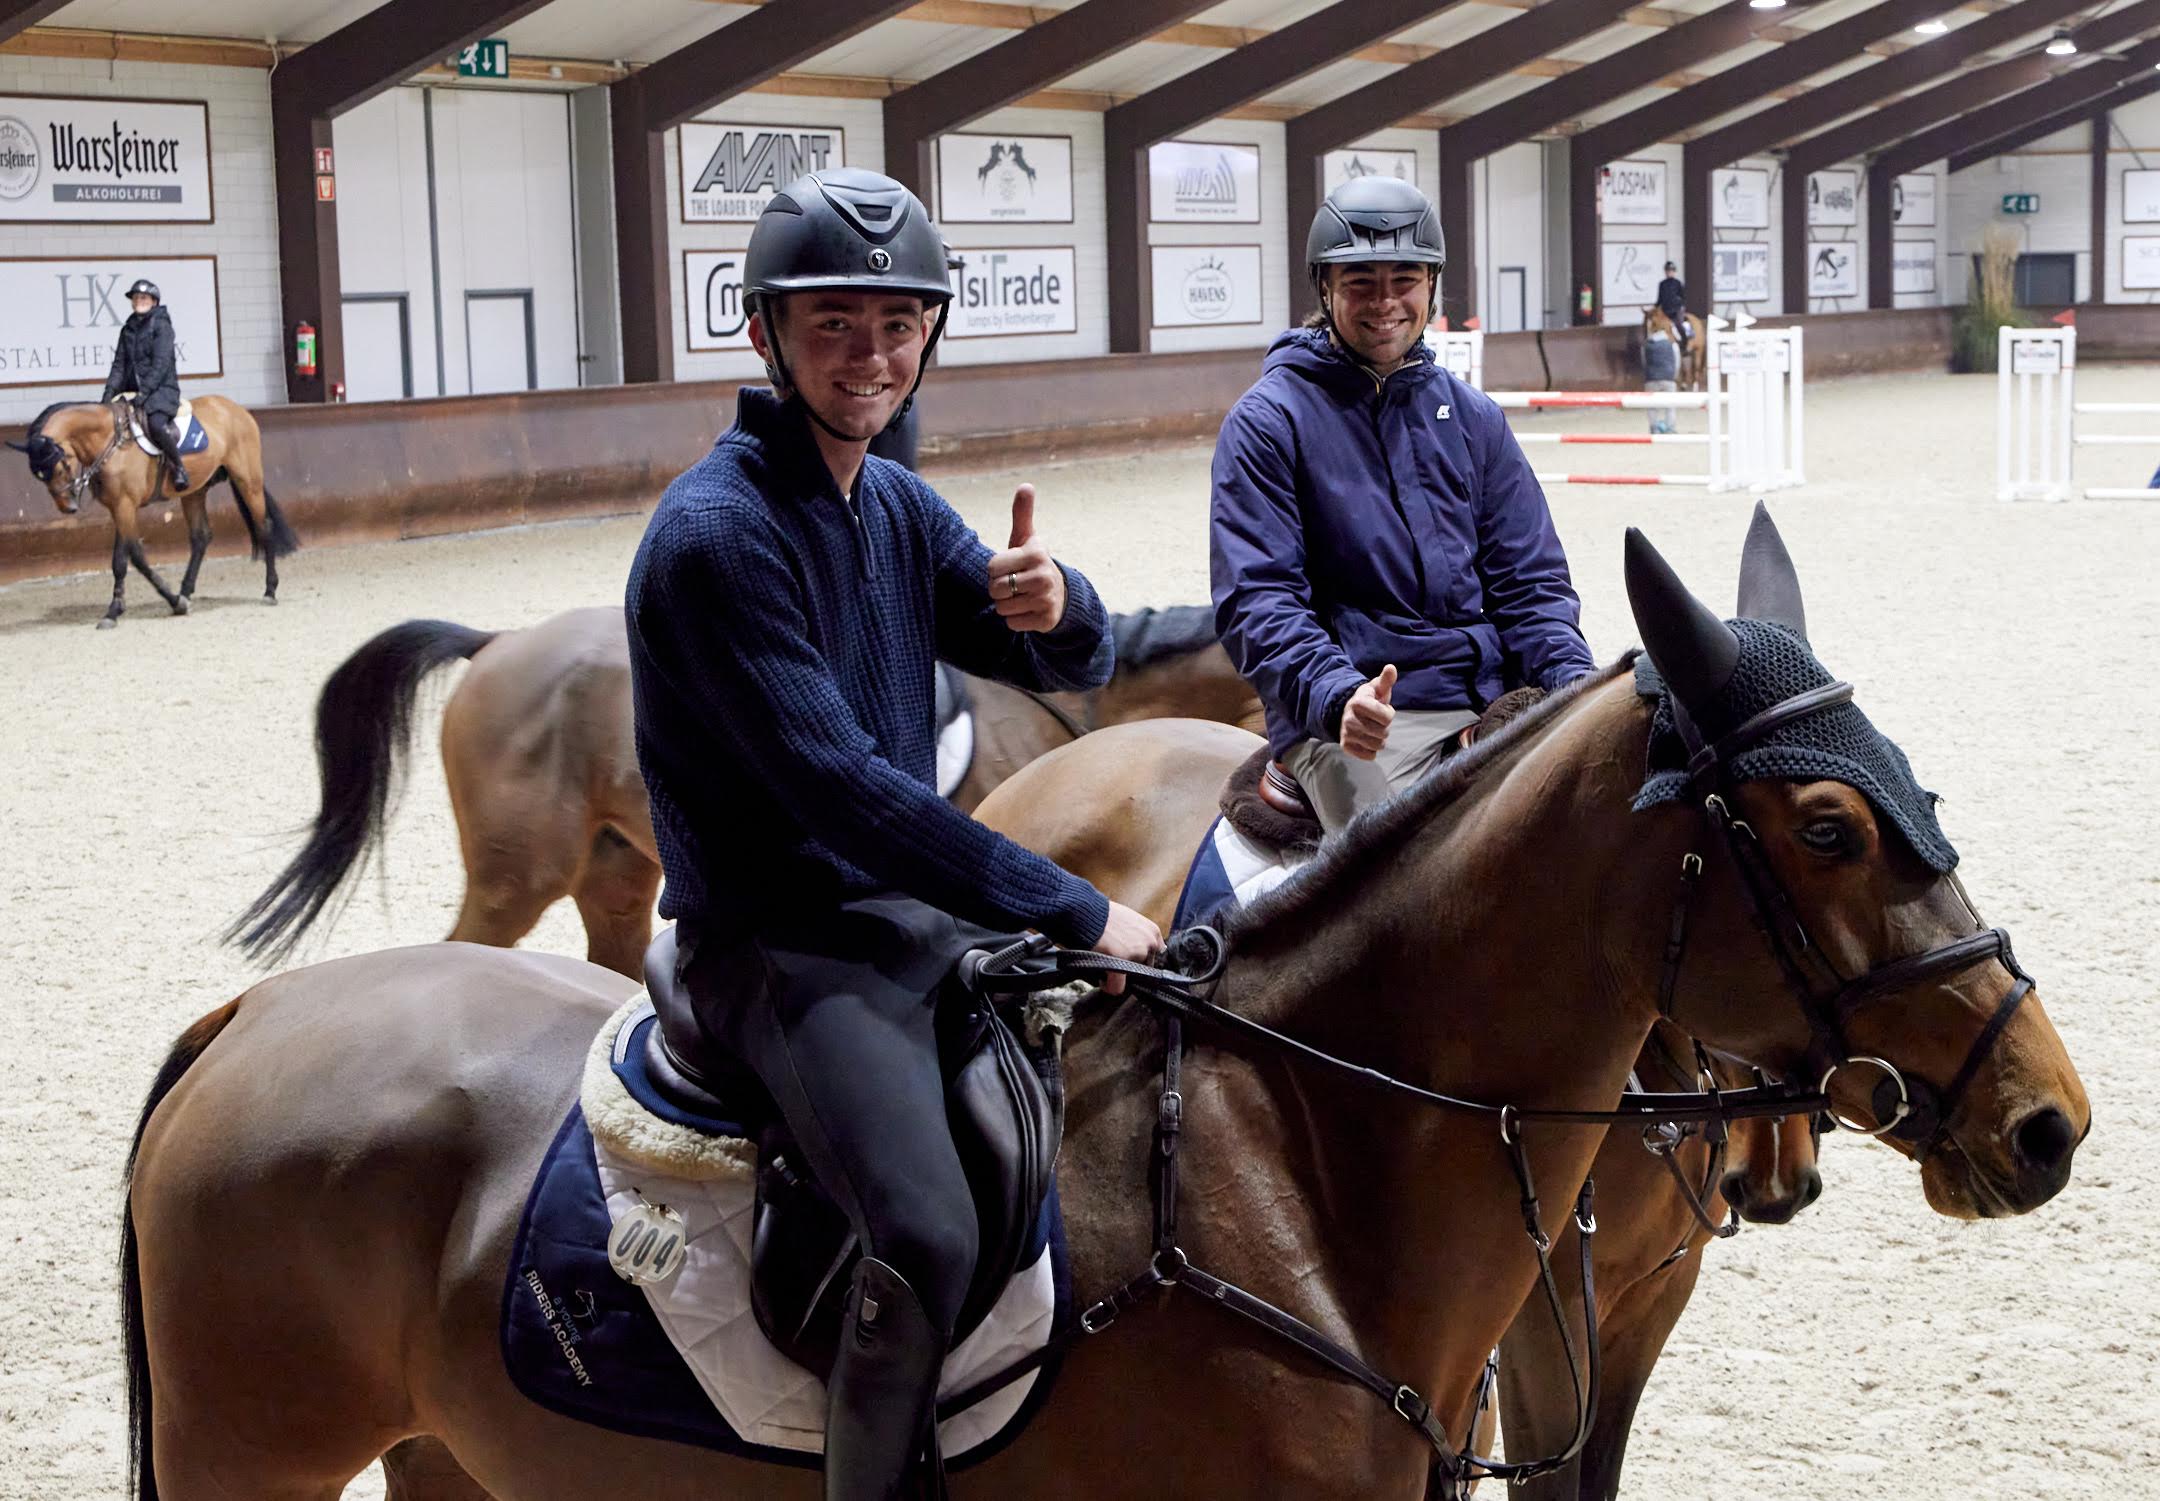 Seven new talented riders appointed to full program Young Riders Academy "It is a truly inspiring group!"